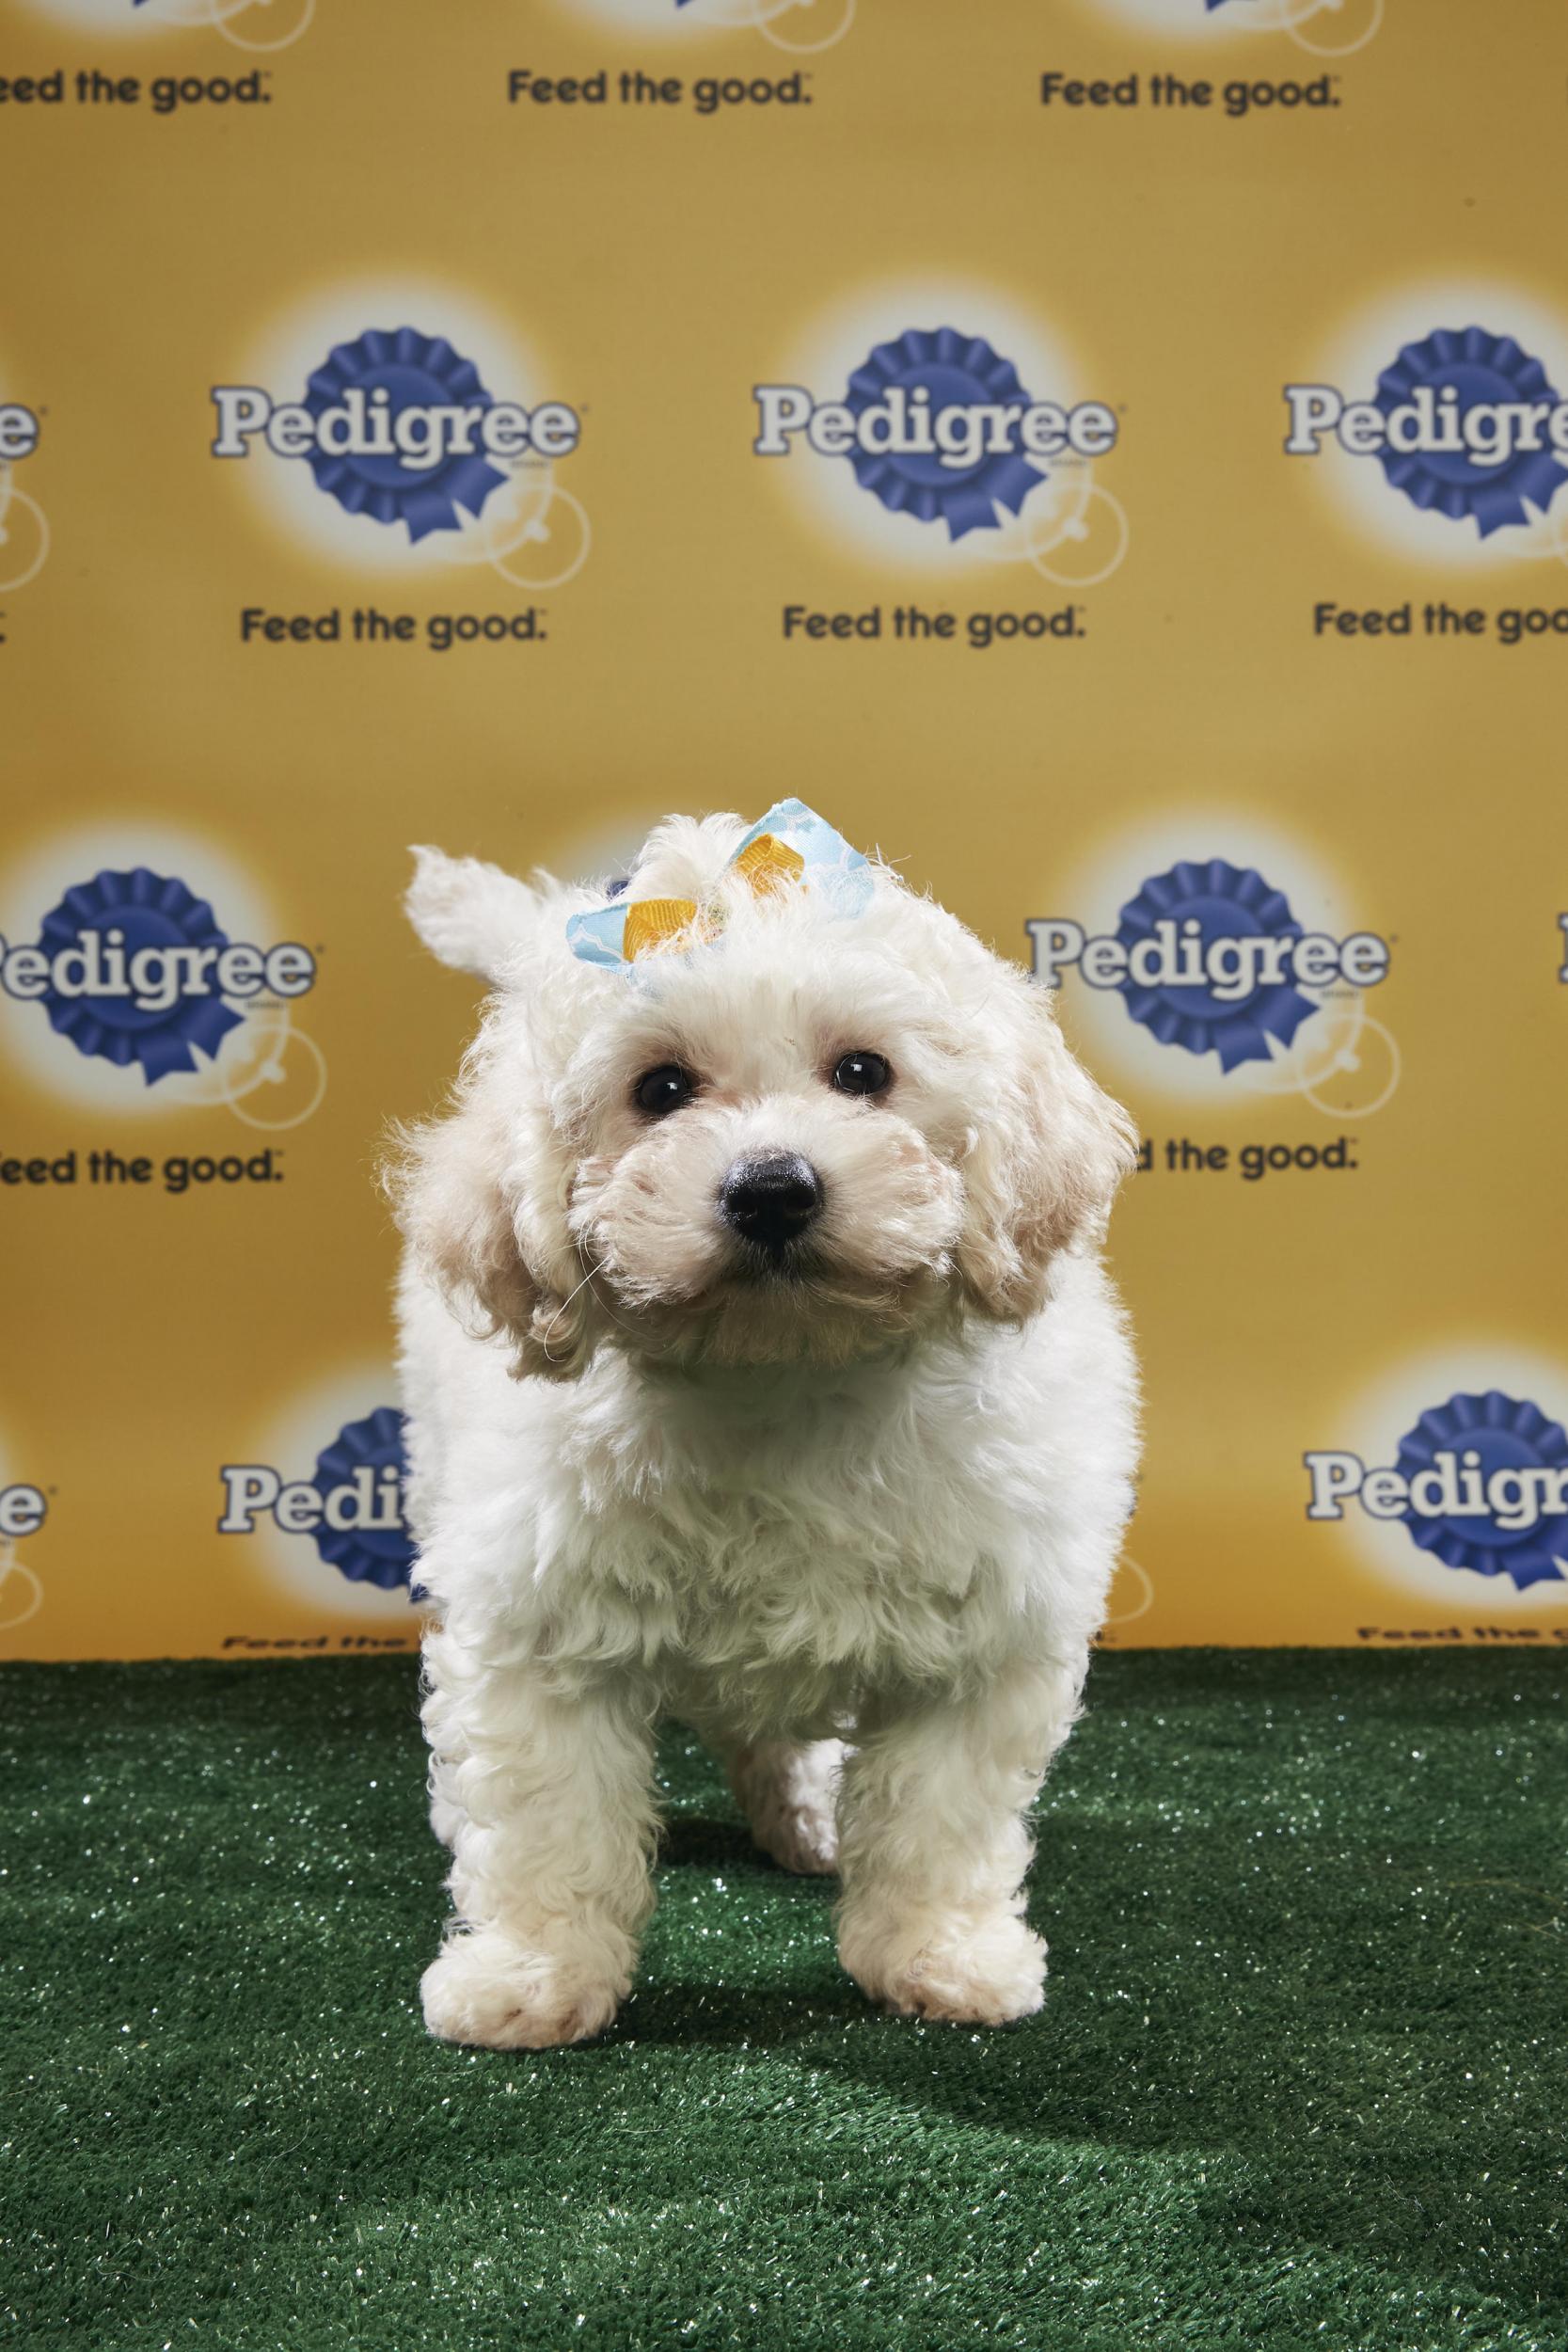 All of the puppies playing in the Puppy Bowl need homes (Animal Planet)